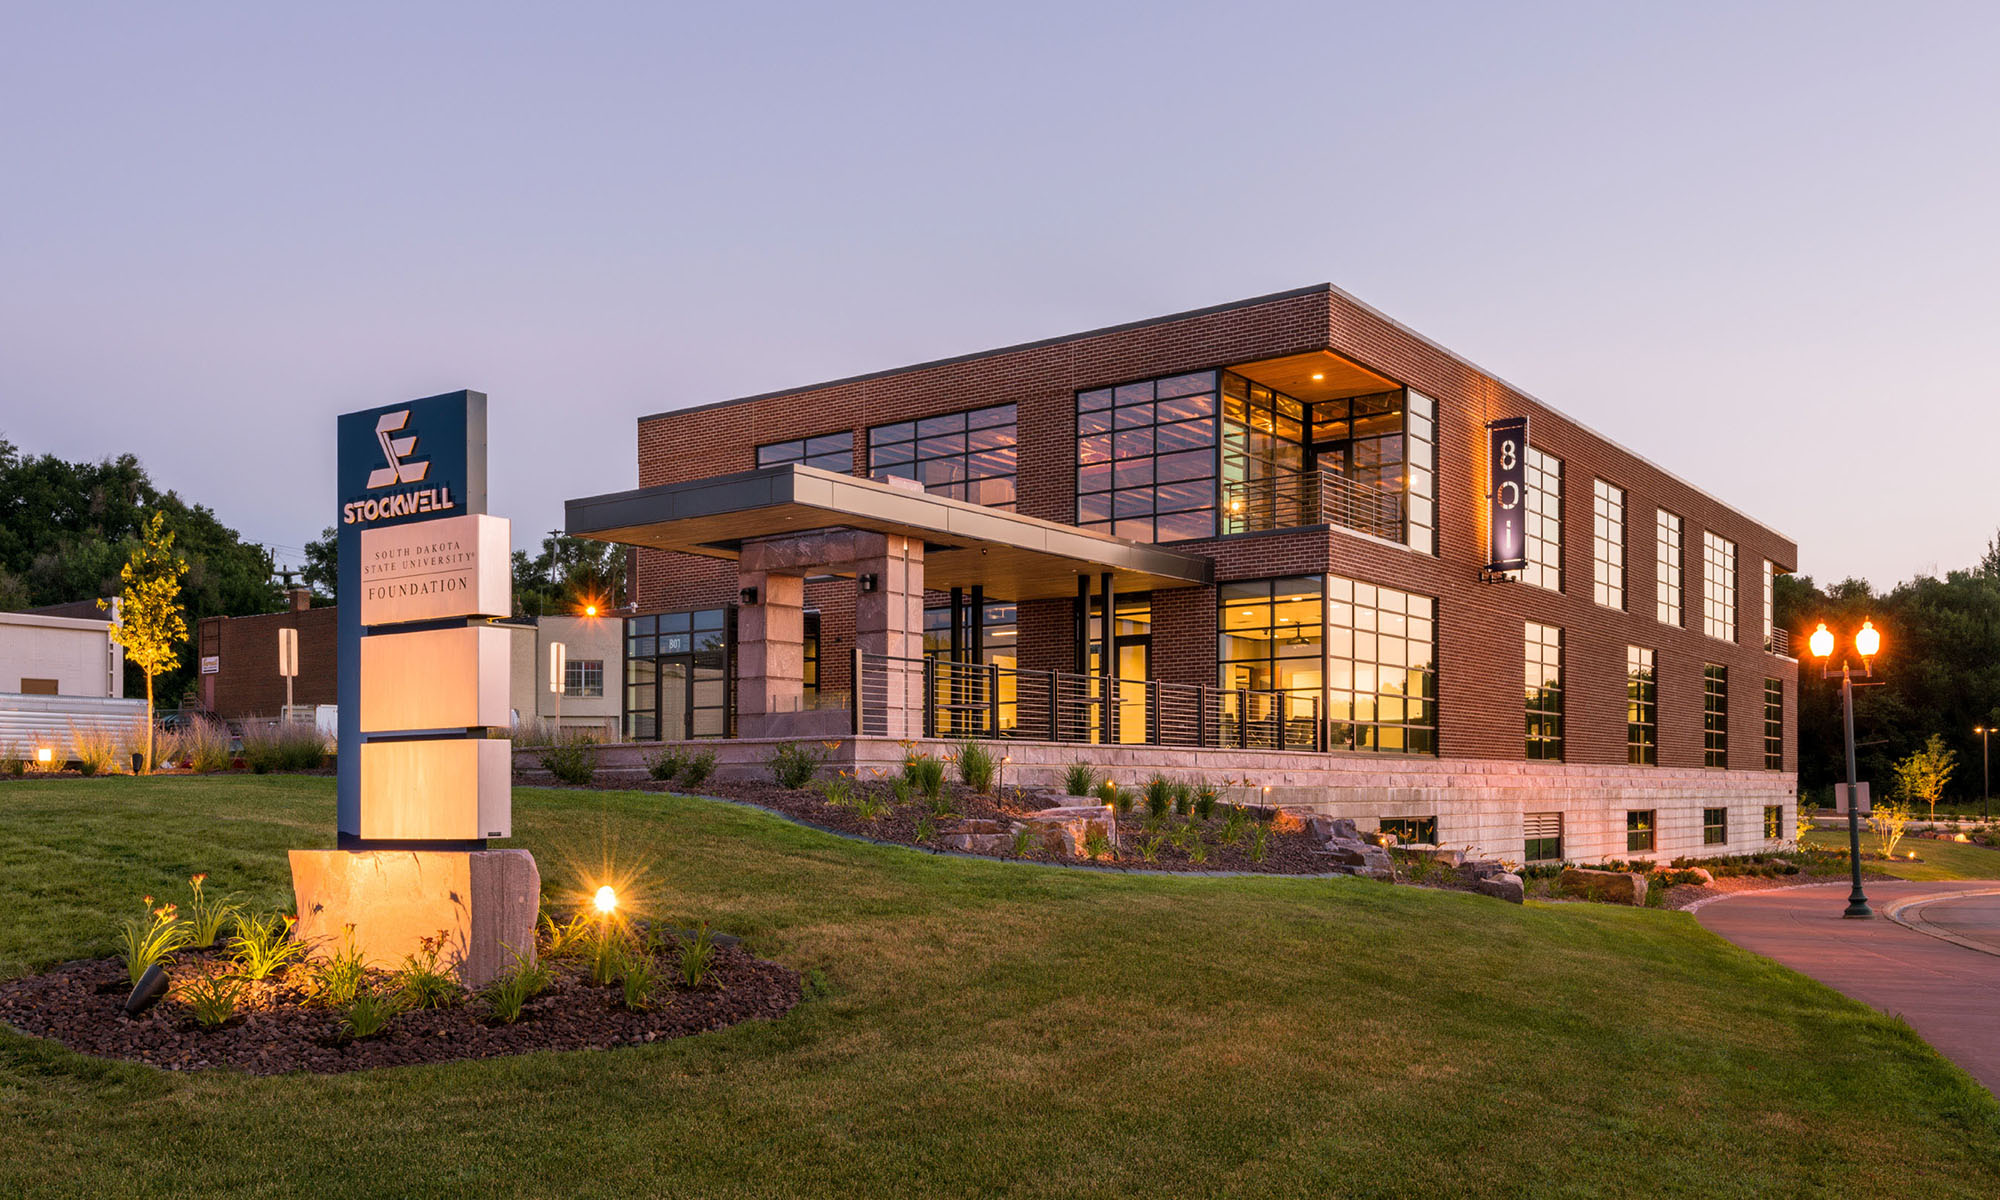 Stockwell Engineers in Sioux Falls (Photo by Koch Hazard Architects)